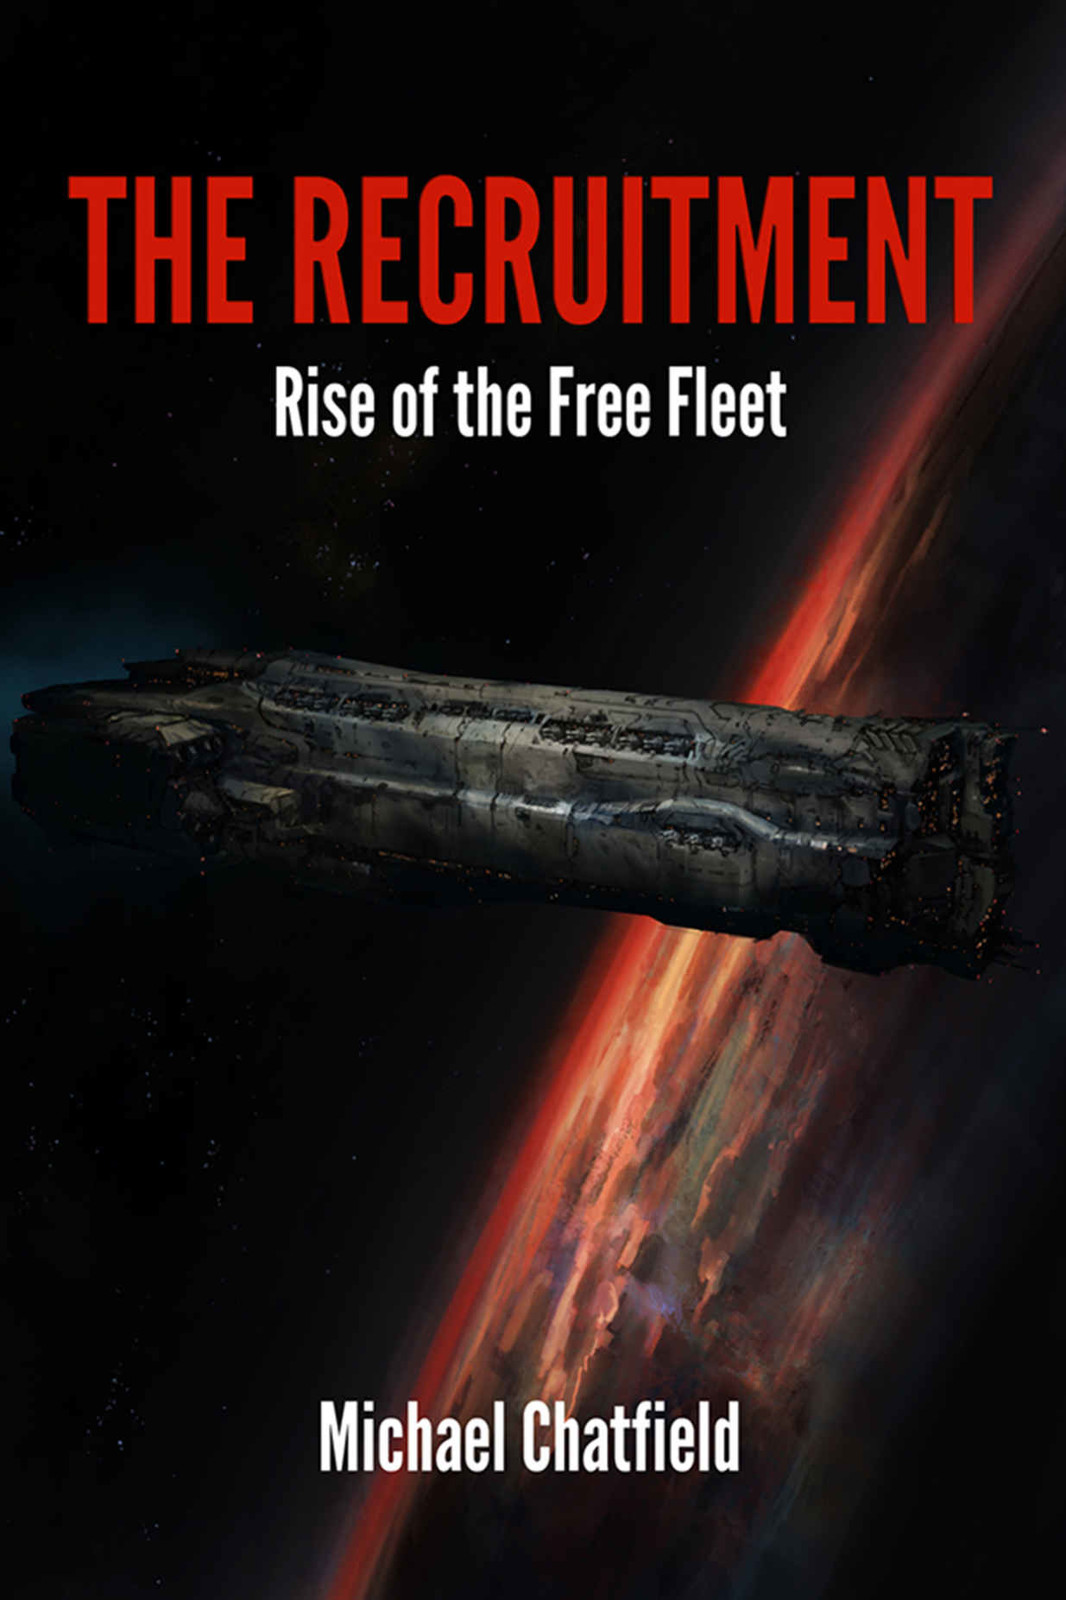 The Recruitment: Rise of the Free Fleet